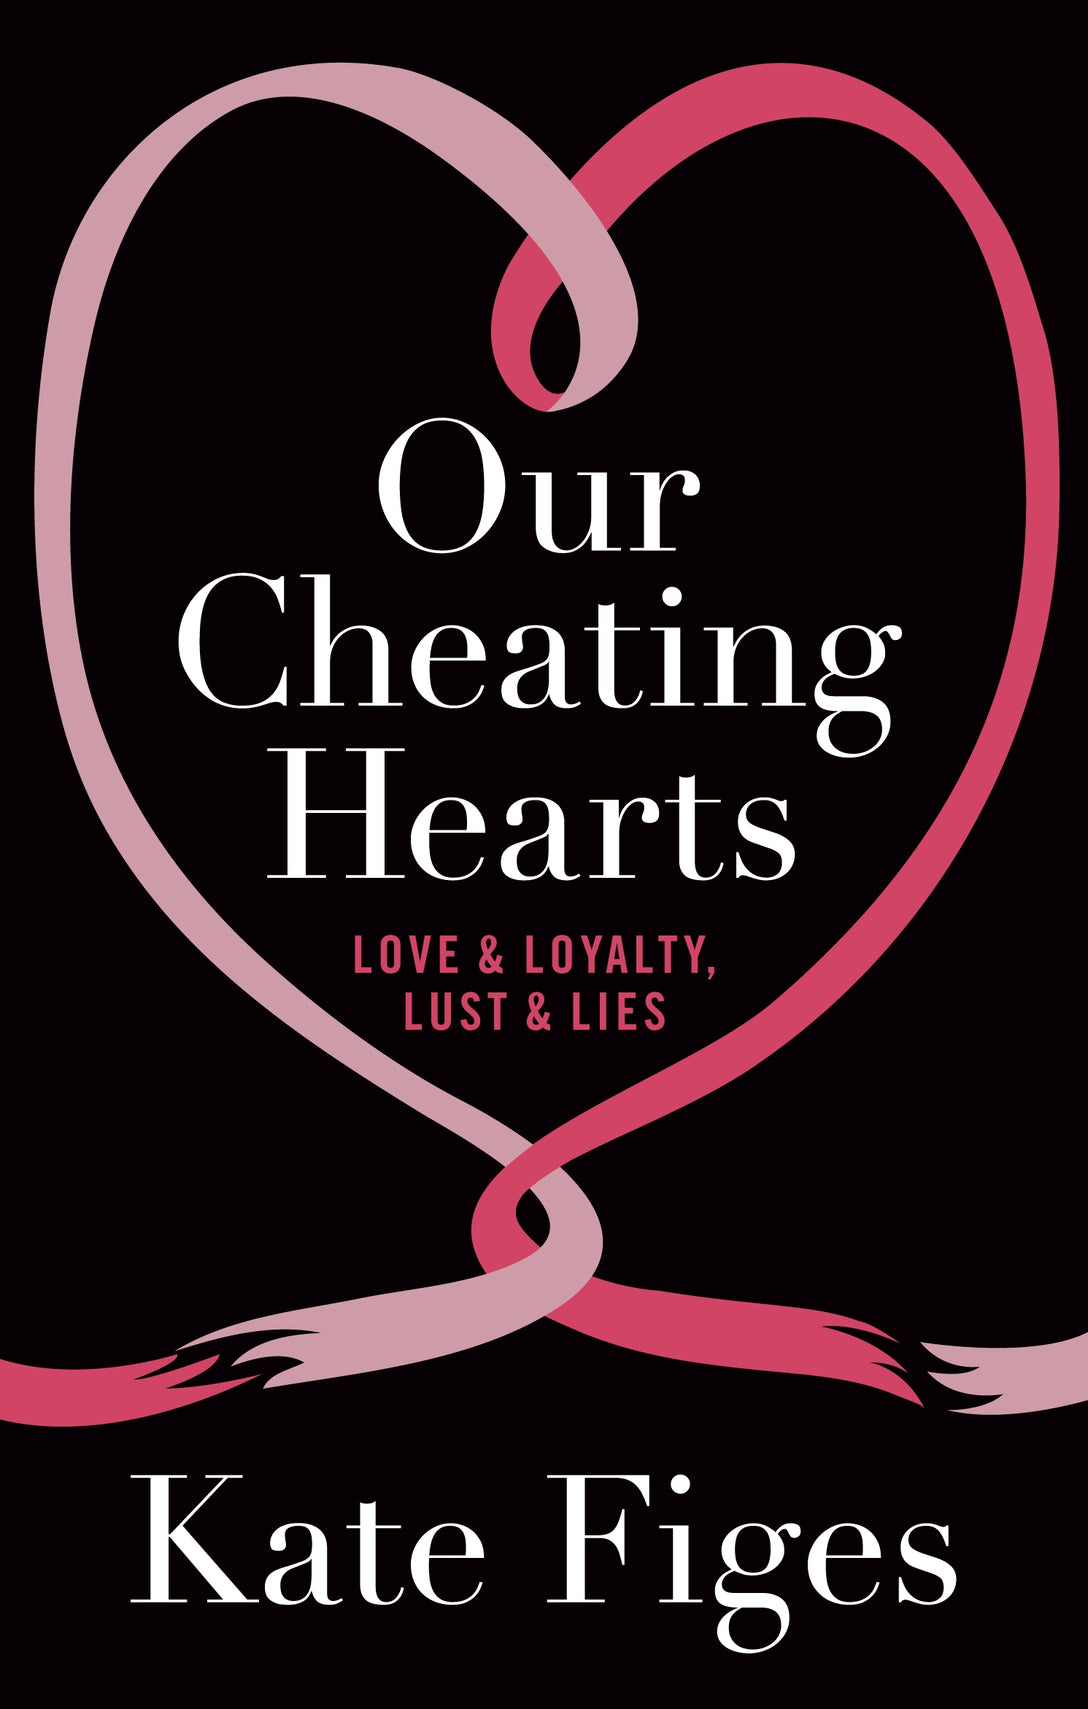 Our Cheating Hearts by Kate Figes